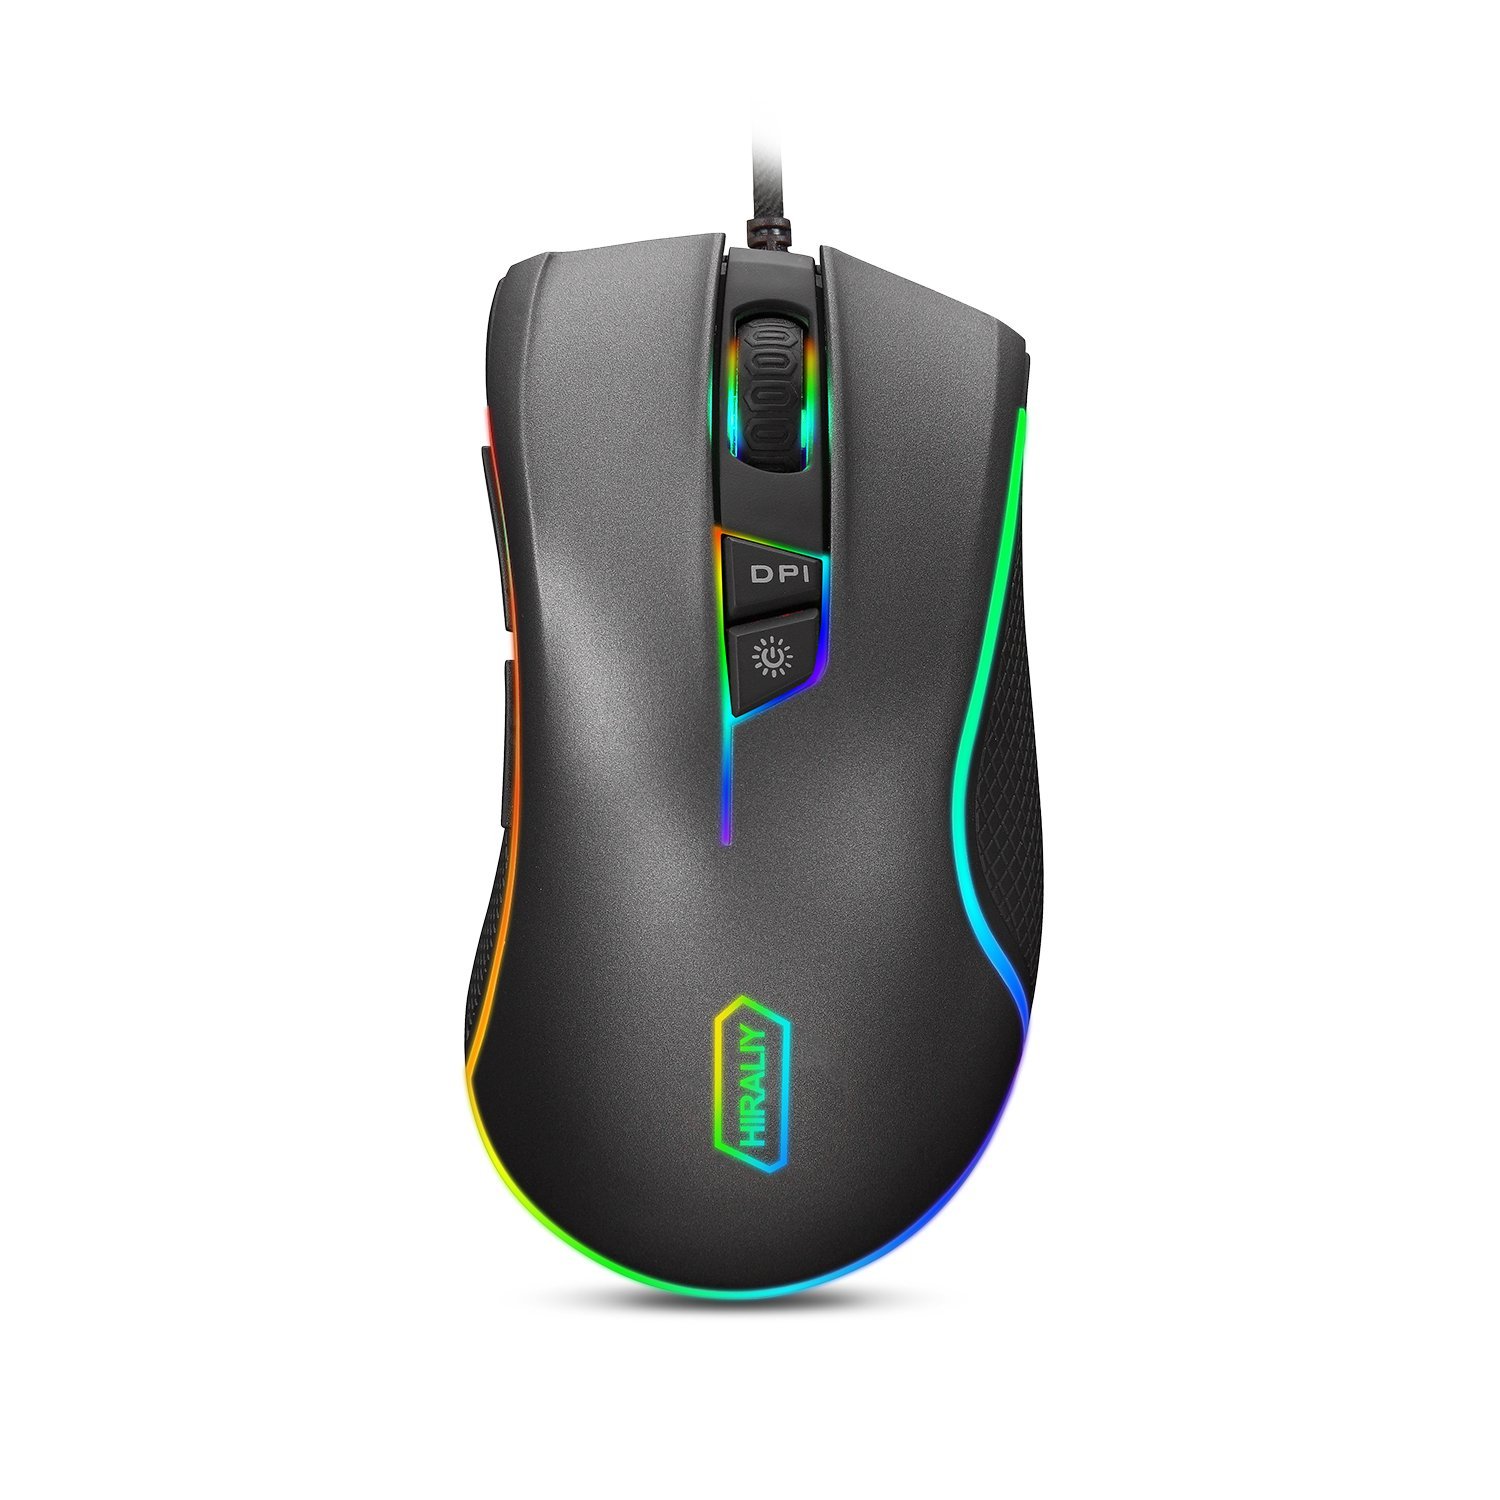 Best logitech gaming mouse